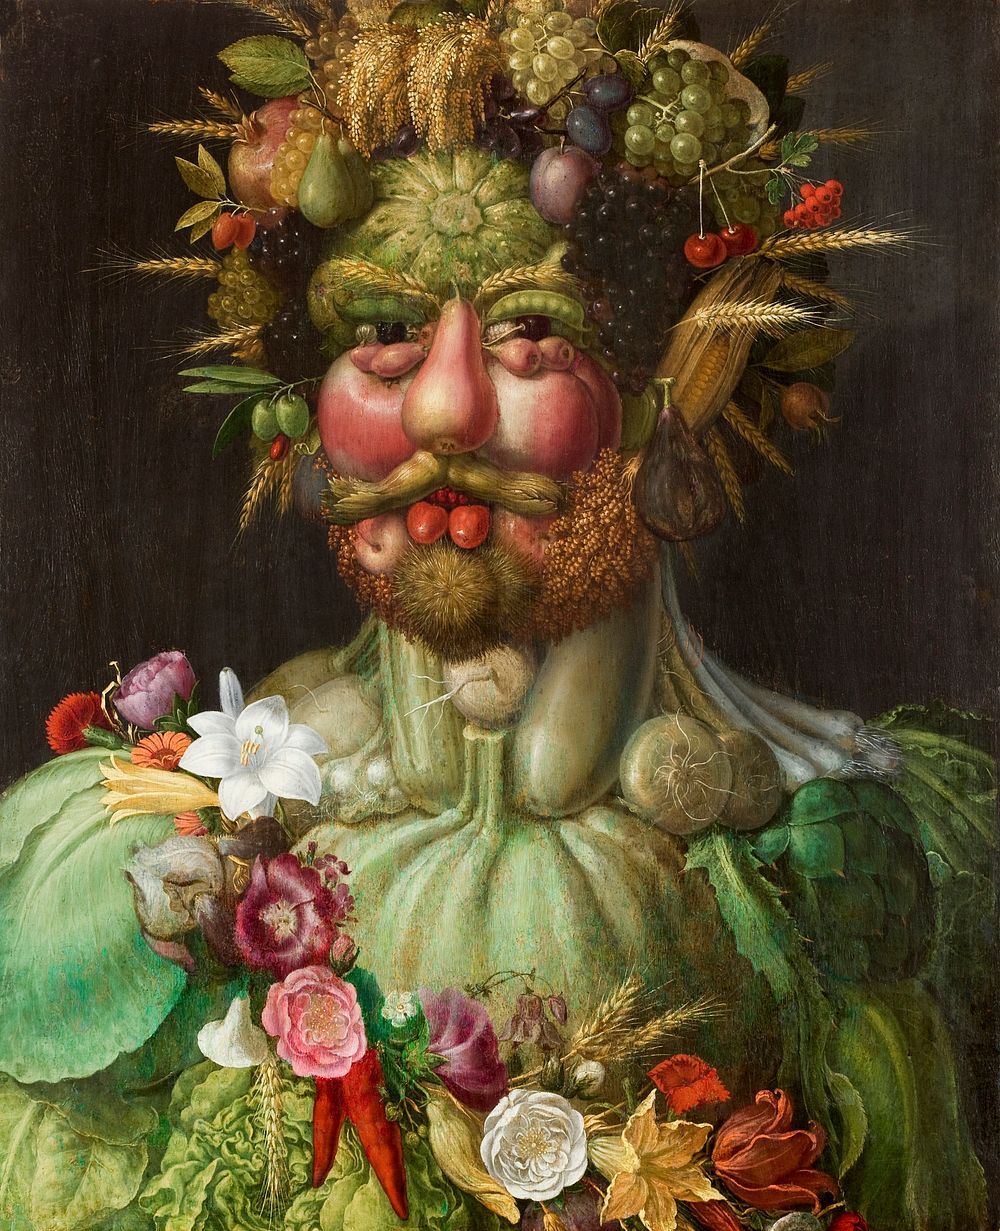 Emperor Rudolf II as Vertumnus, the Roman god of the seasons, growth, plants and fruit. The portrait is meant as an imperial…